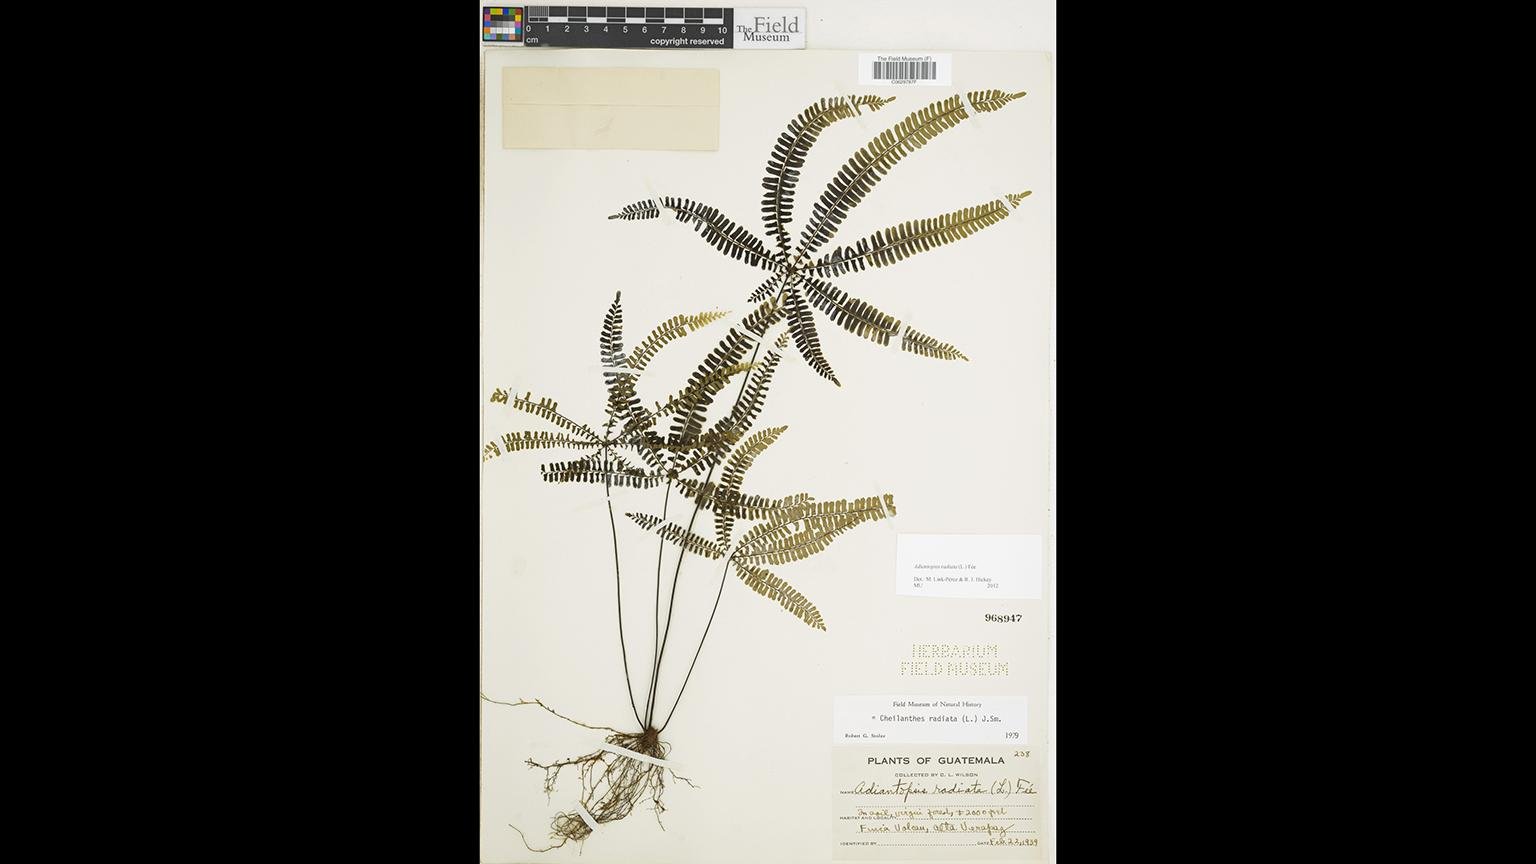 A plant species in the Field Museum’s collection (Courtesy Field Museum)